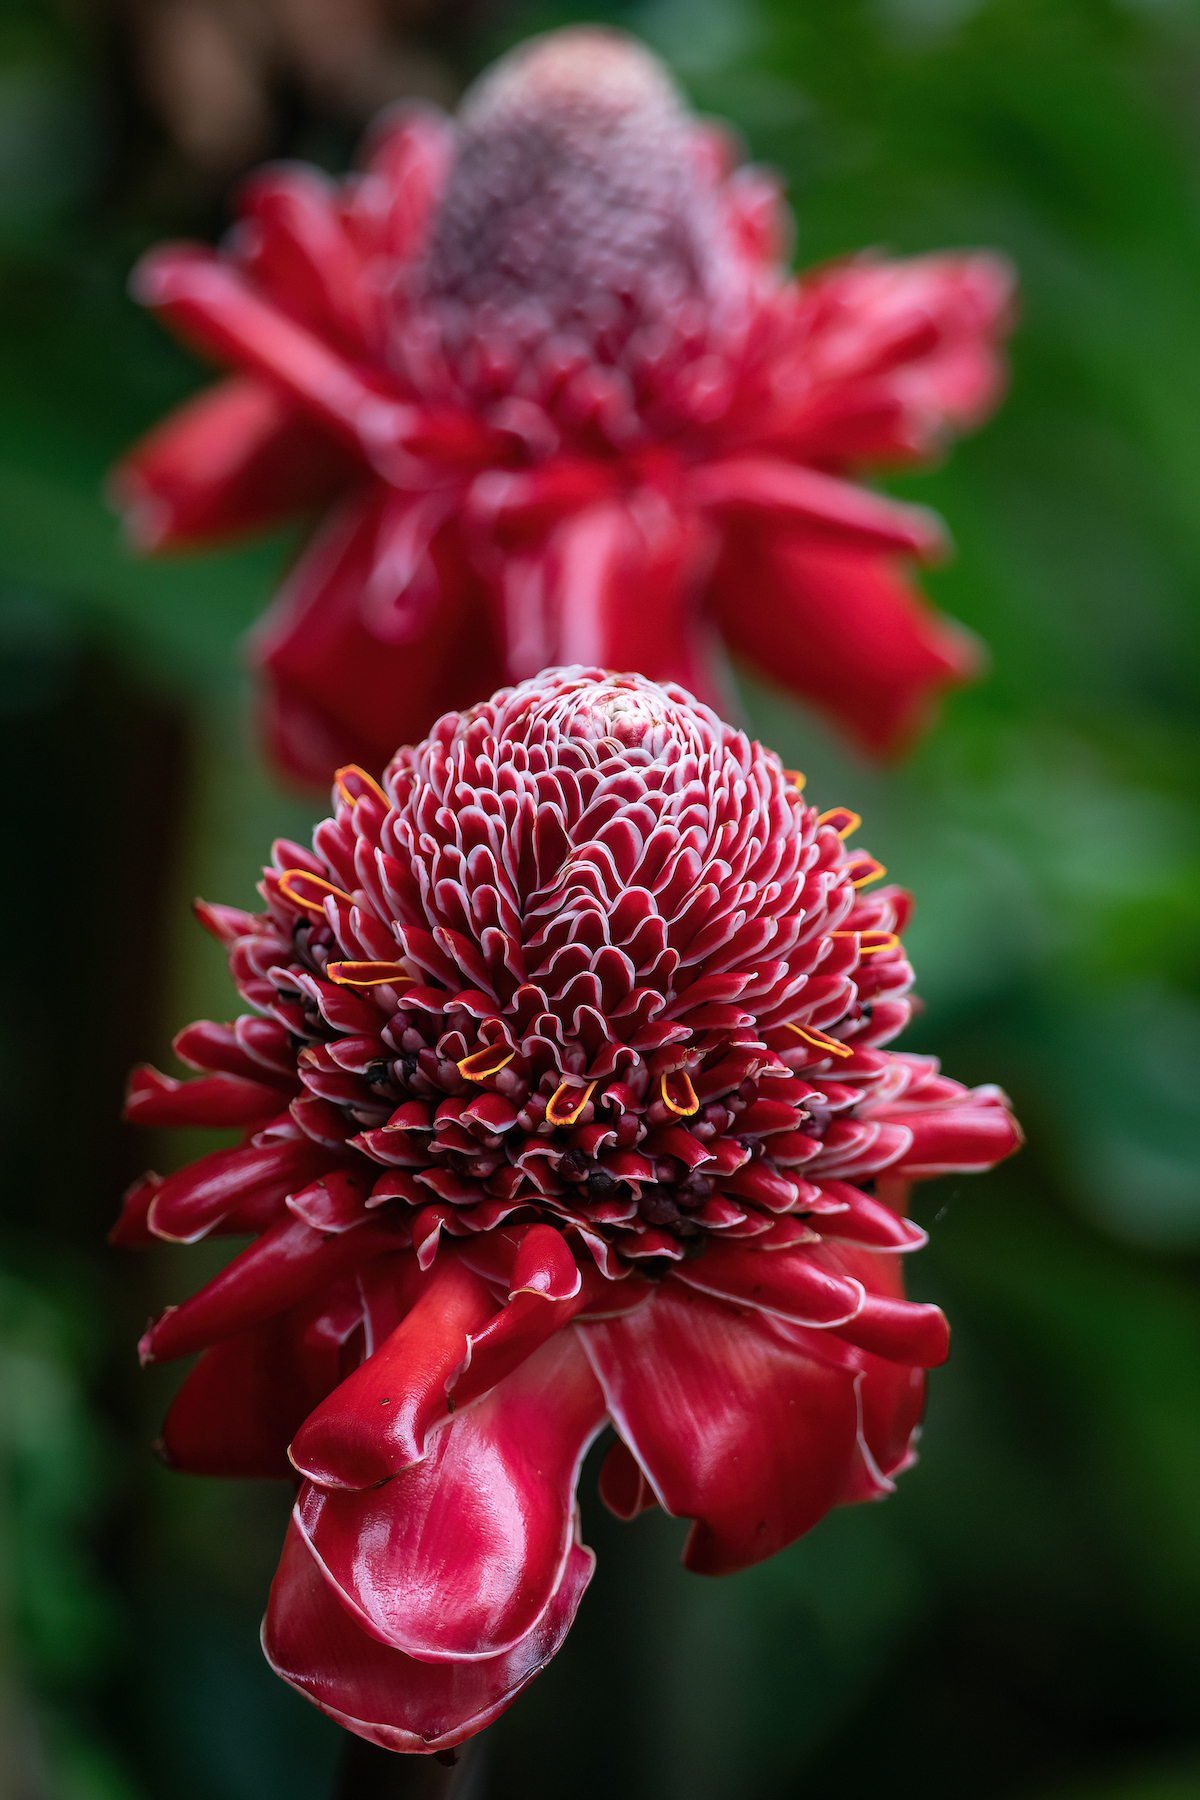 Pink Torch Ginger Flowers in Costa Rica